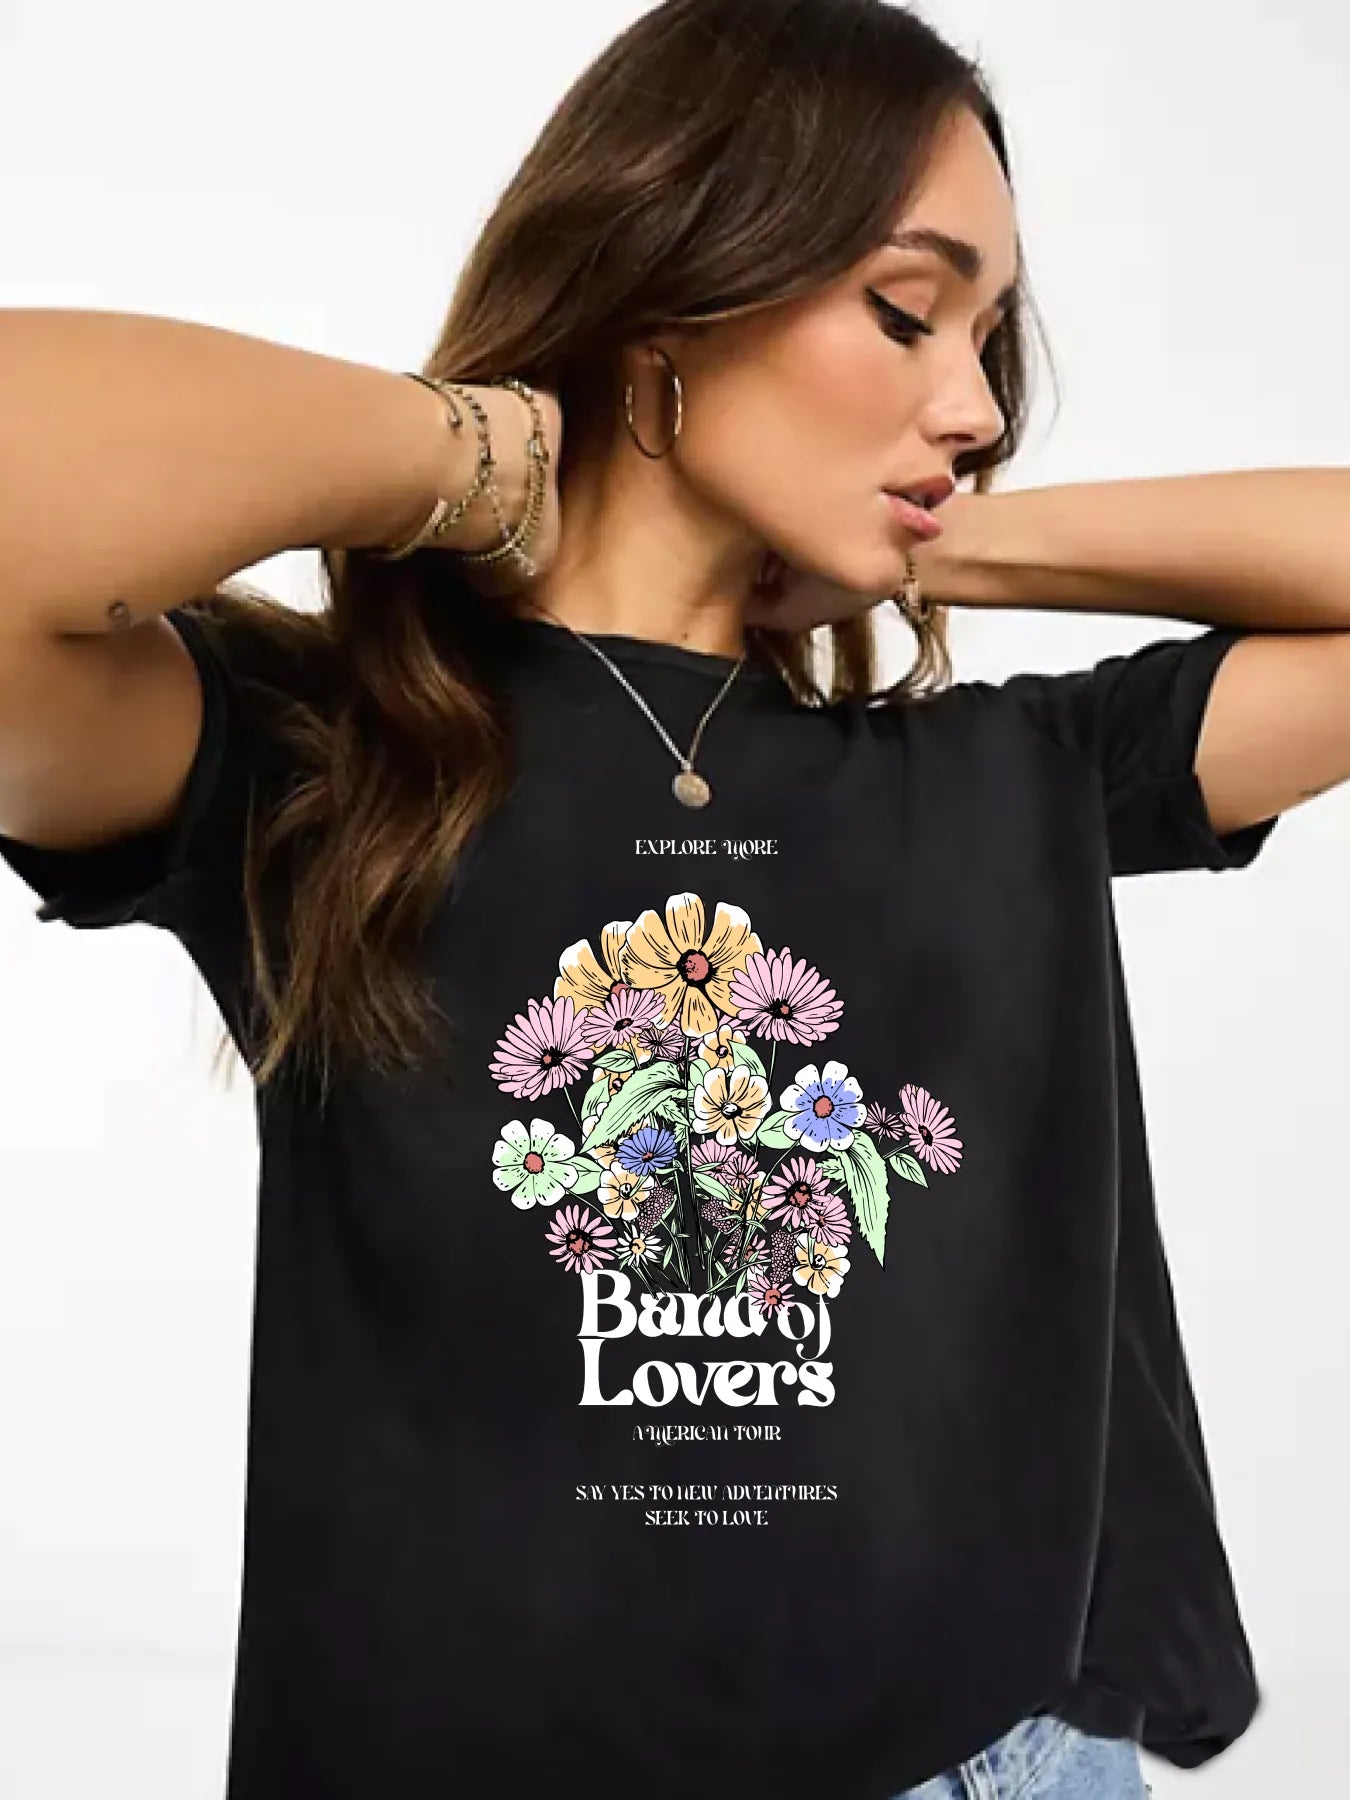 Band of Lovers - T-Shirt